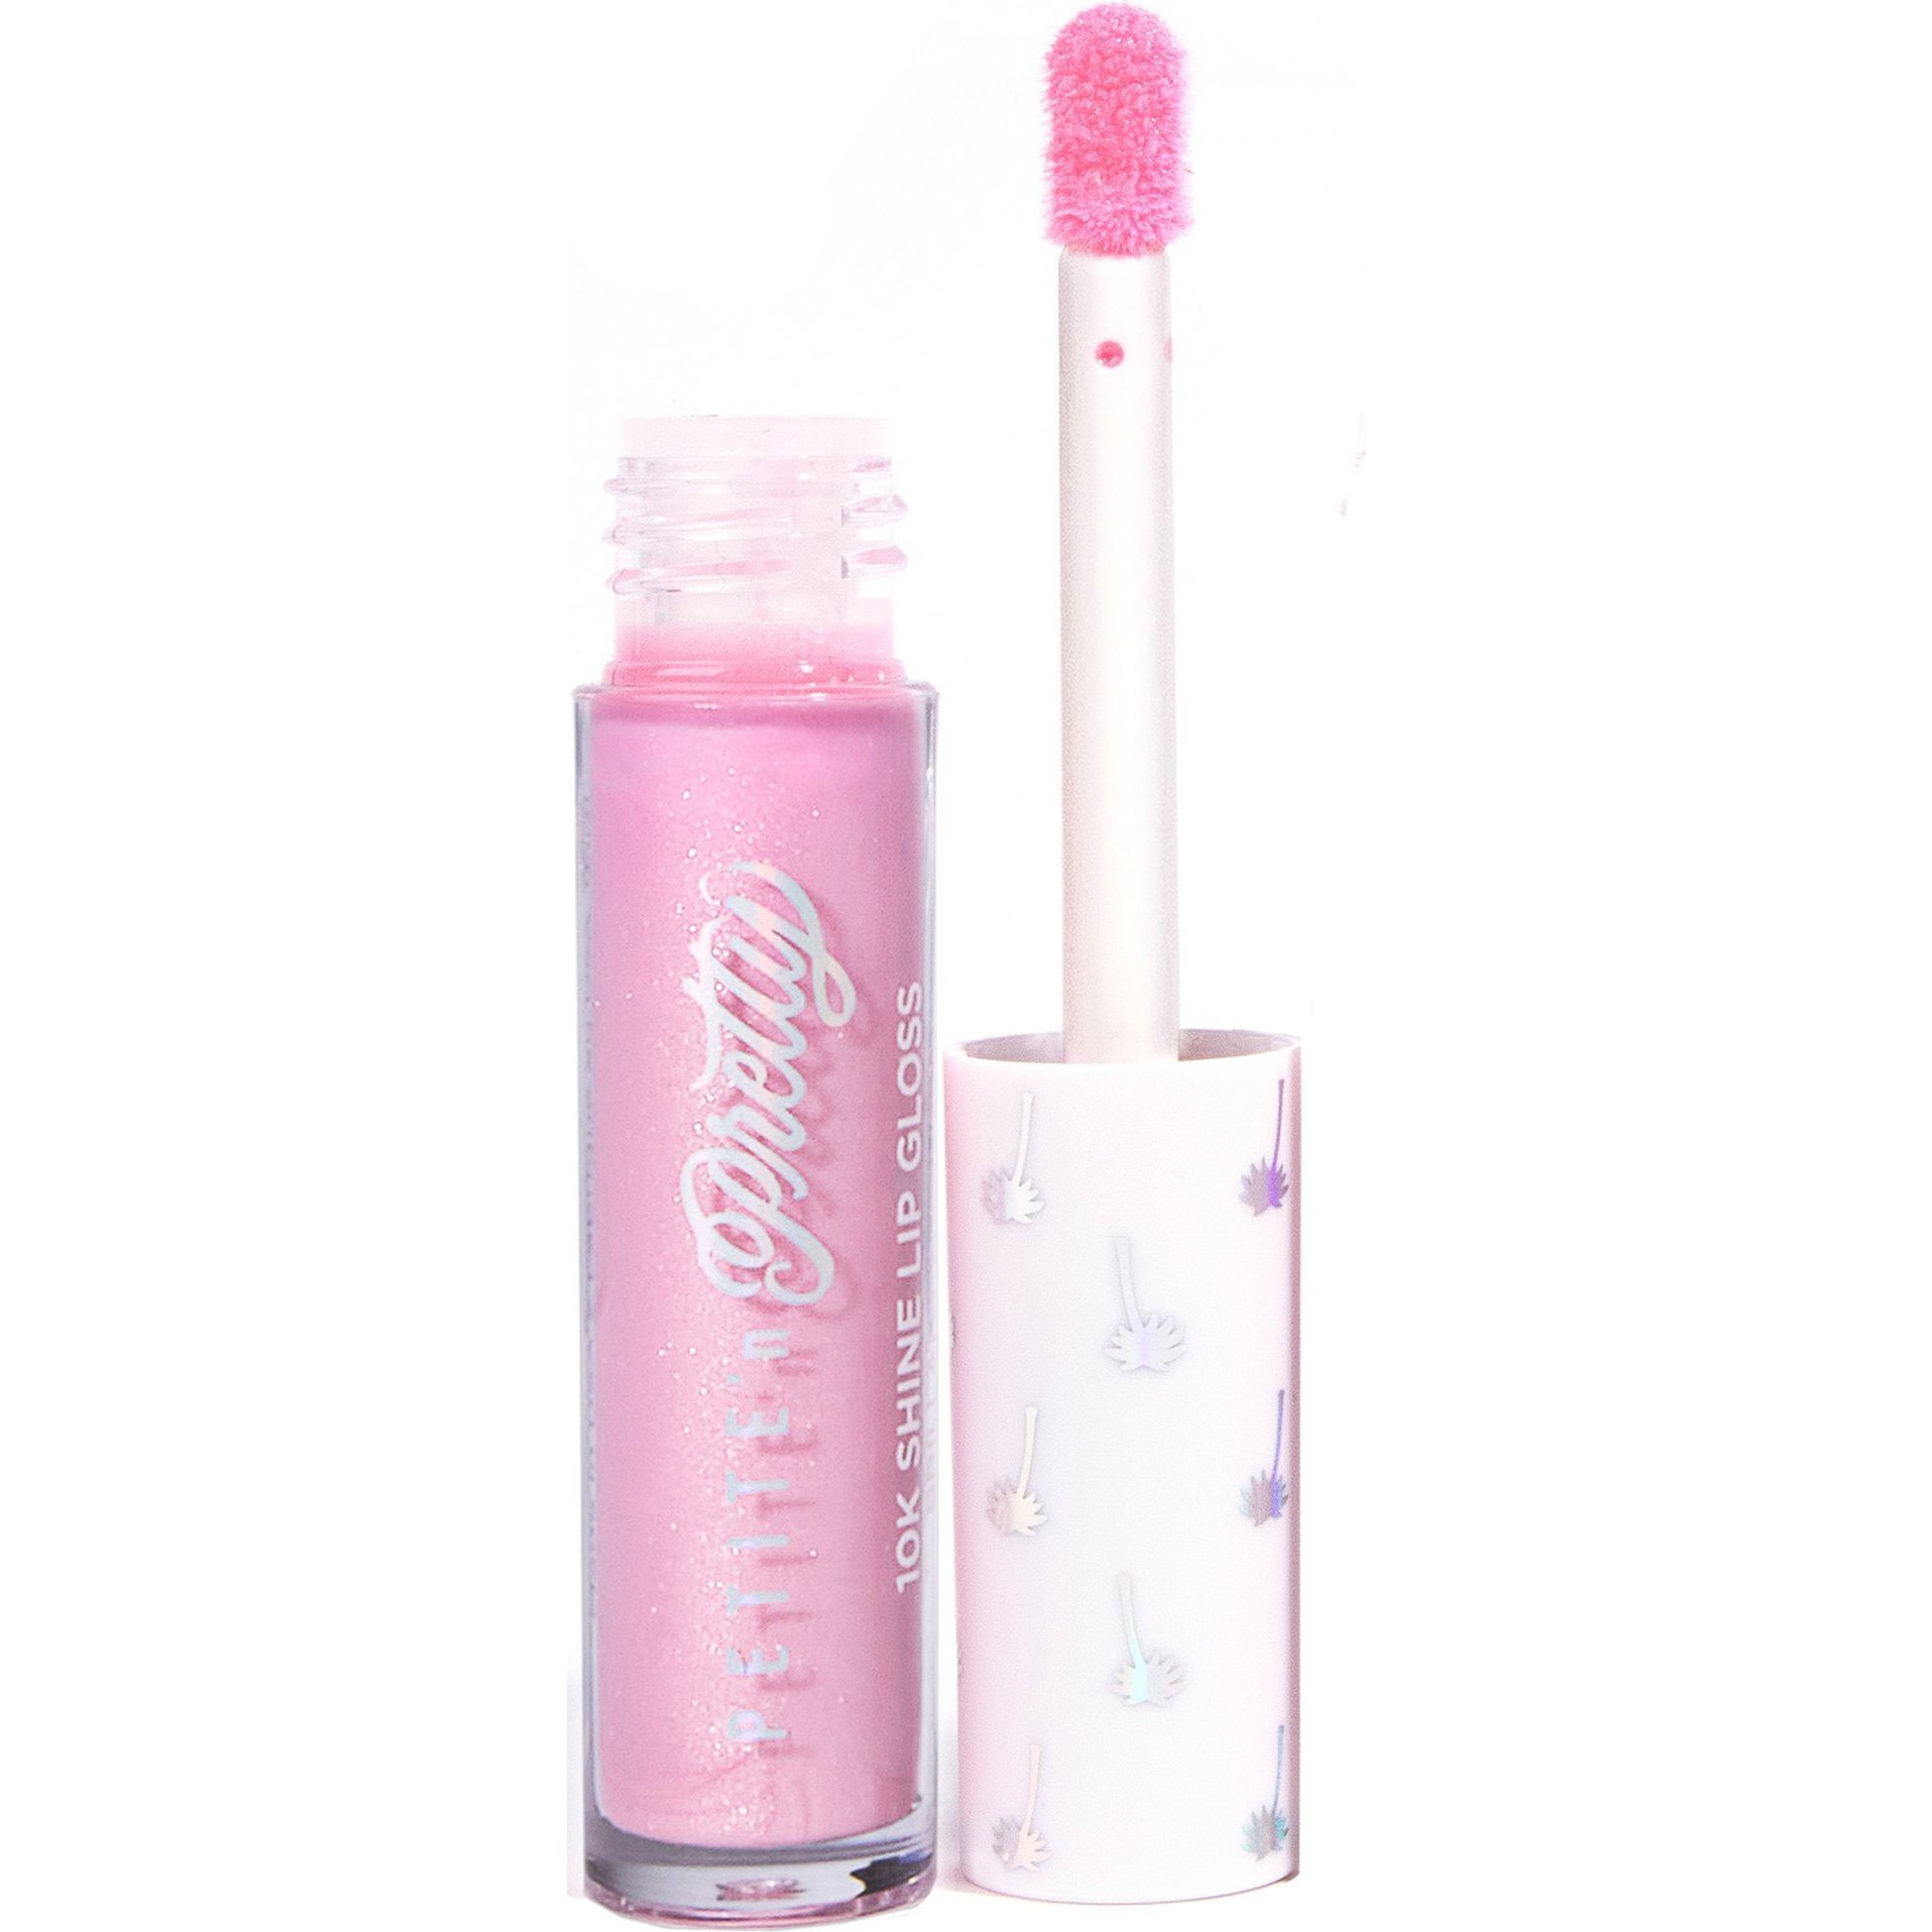 At First Glow Makeup Starter Kit - Petite 'n Pretty - A beauty brand  leading the Sparkle Revolution!